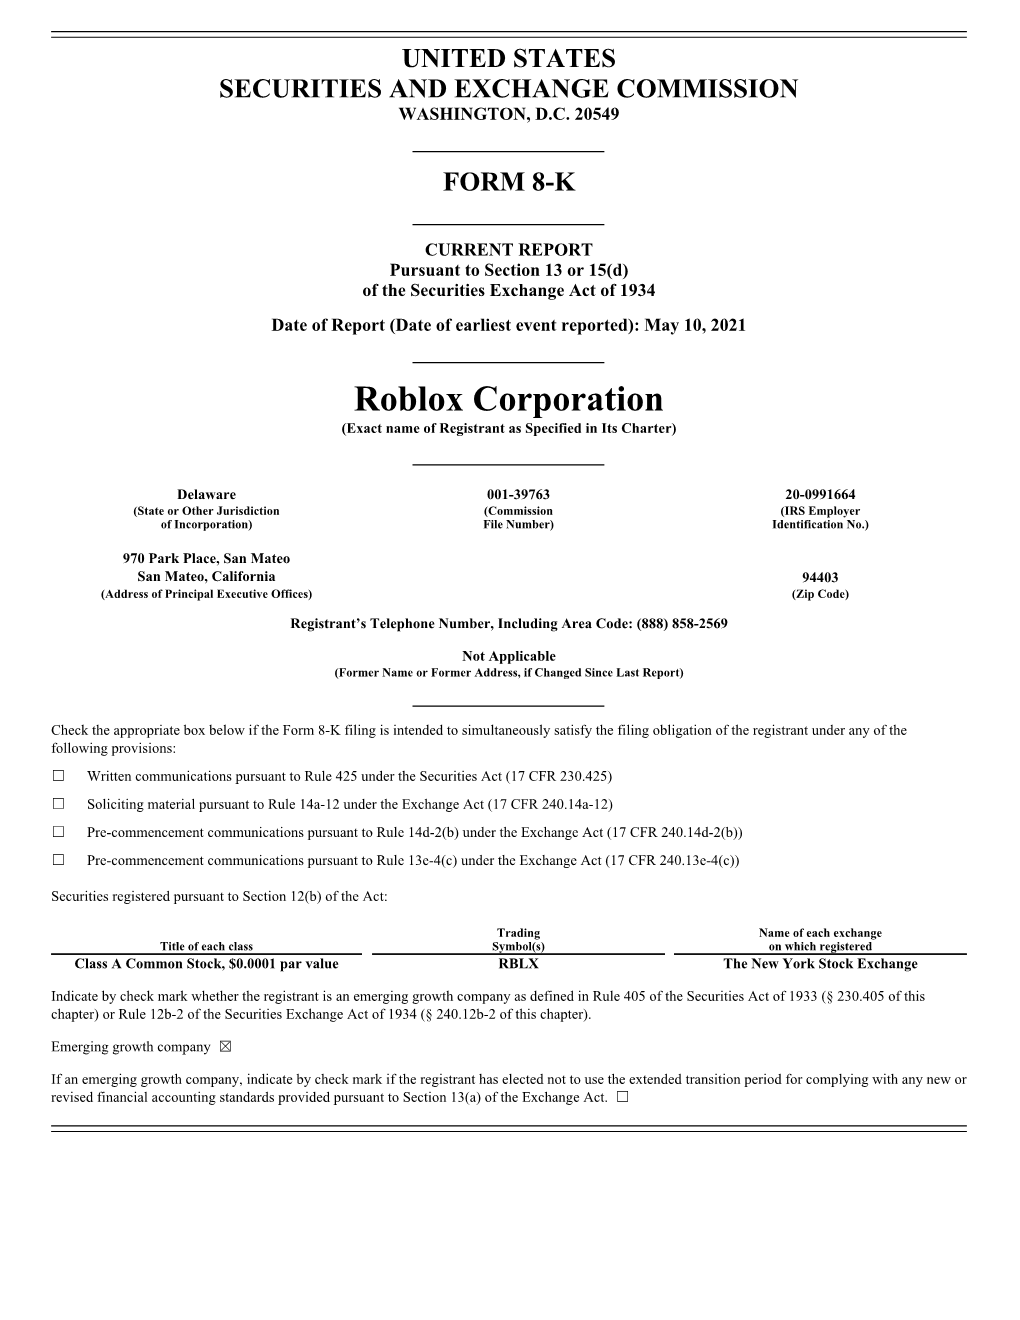 Roblox Corporation (Exact Name of Registrant As Specified in Its Charter)